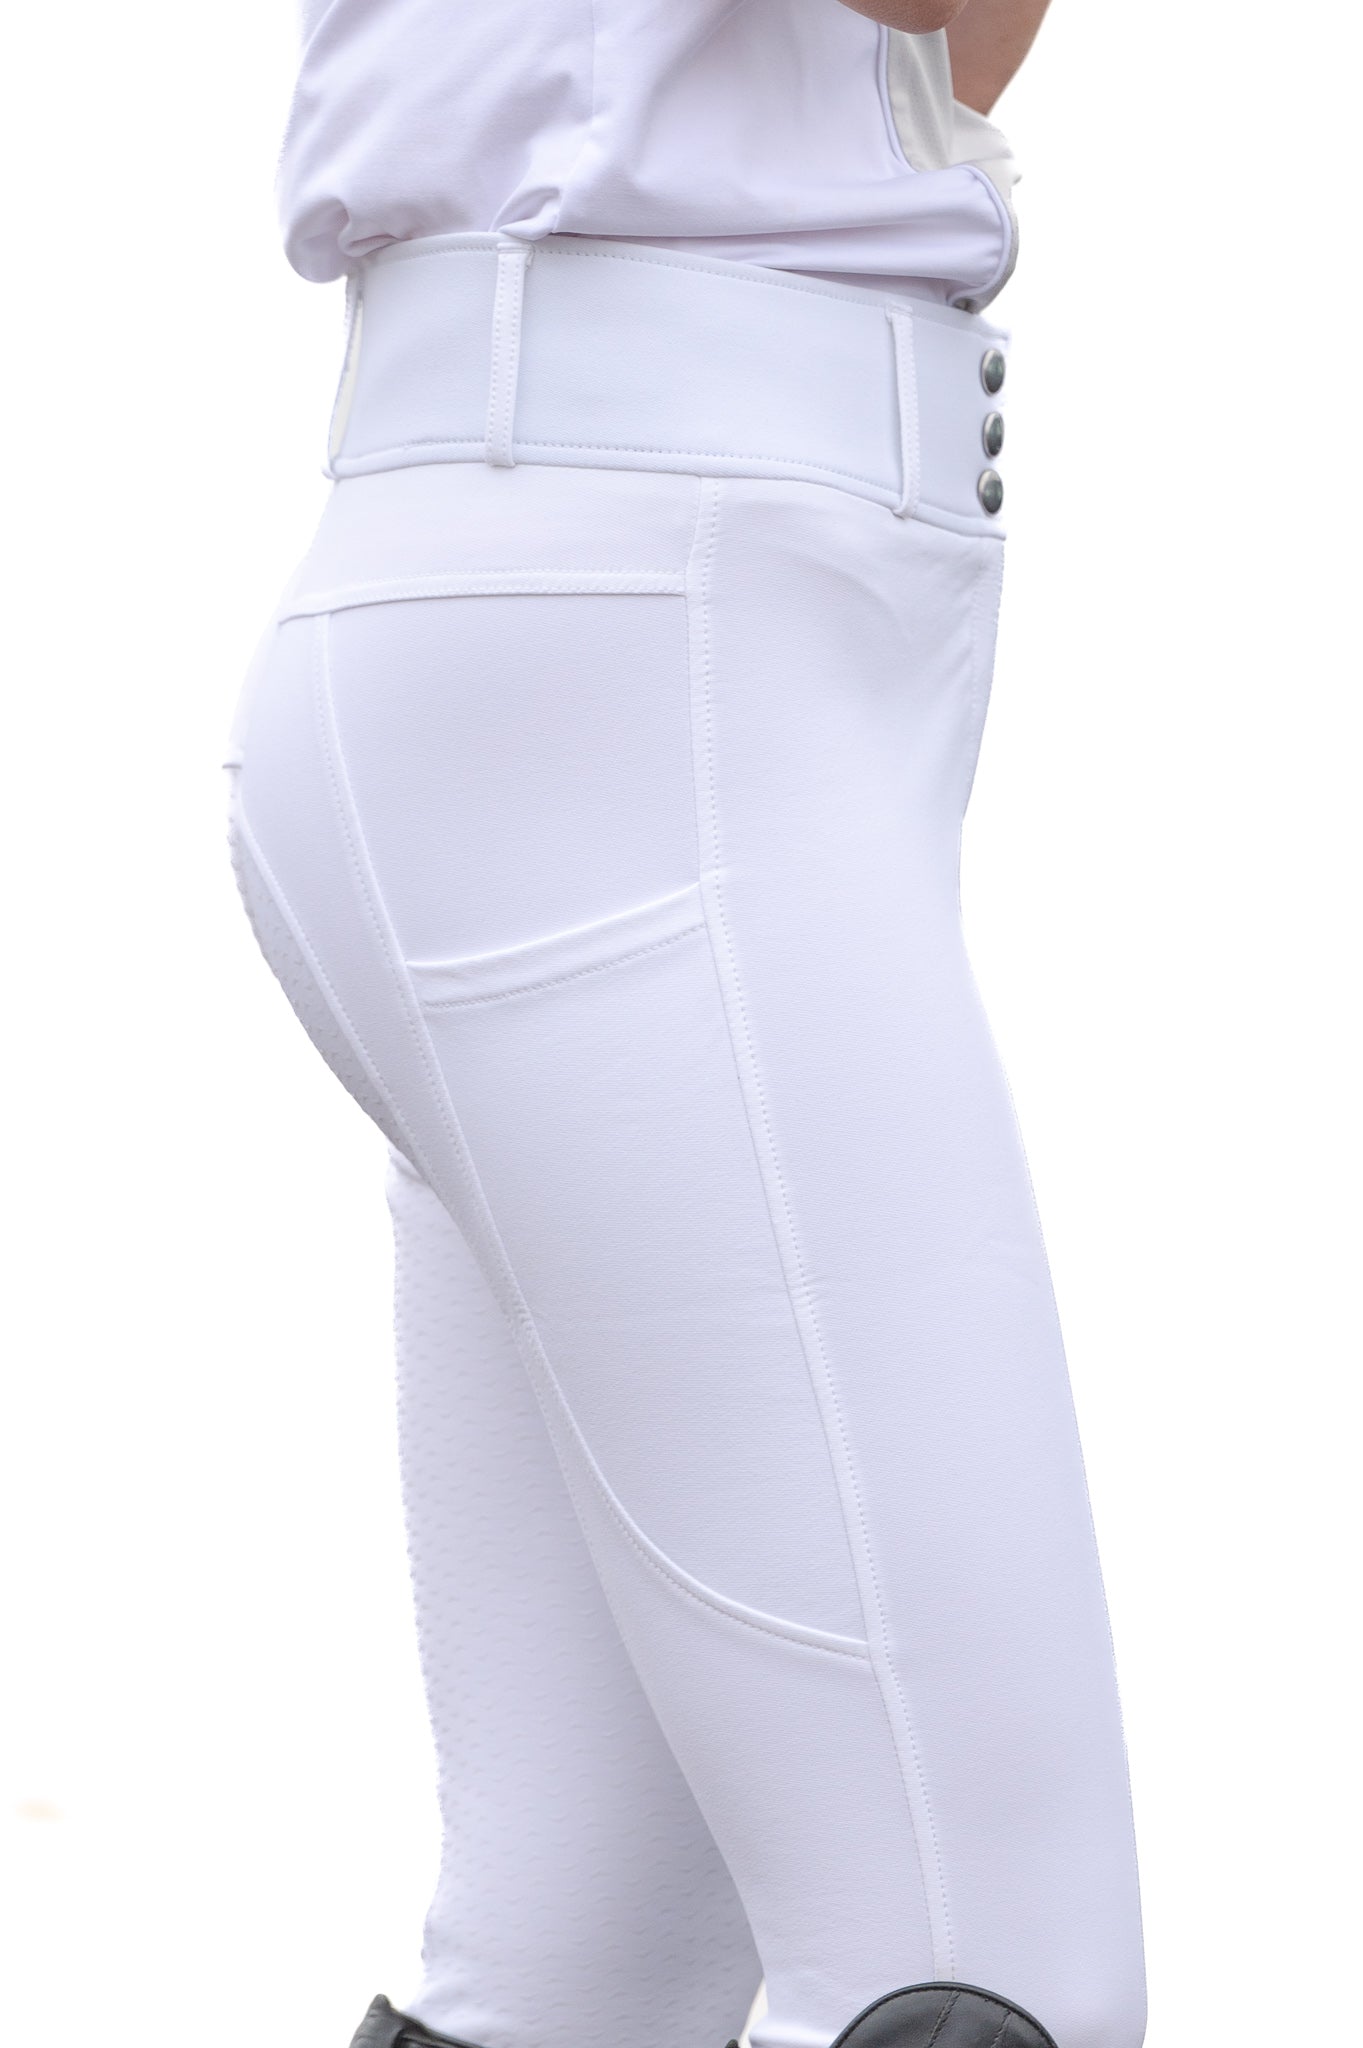 Brittany Show Breeches - All White